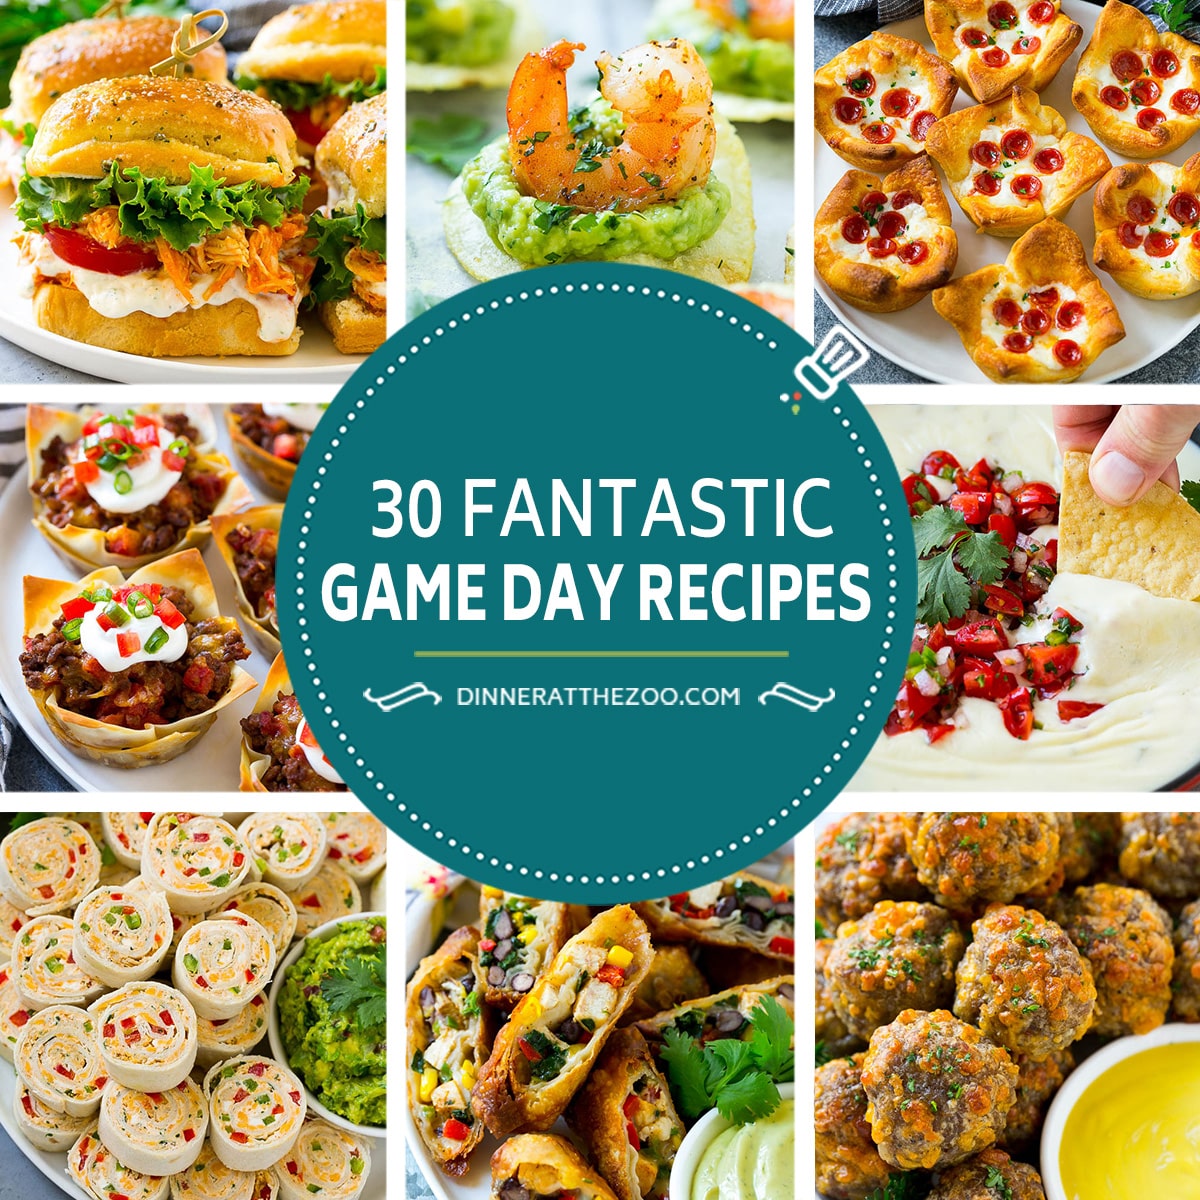 A group of images of game day recipes like southwestern egg rolls, sausage cheese balls and white queso dip.